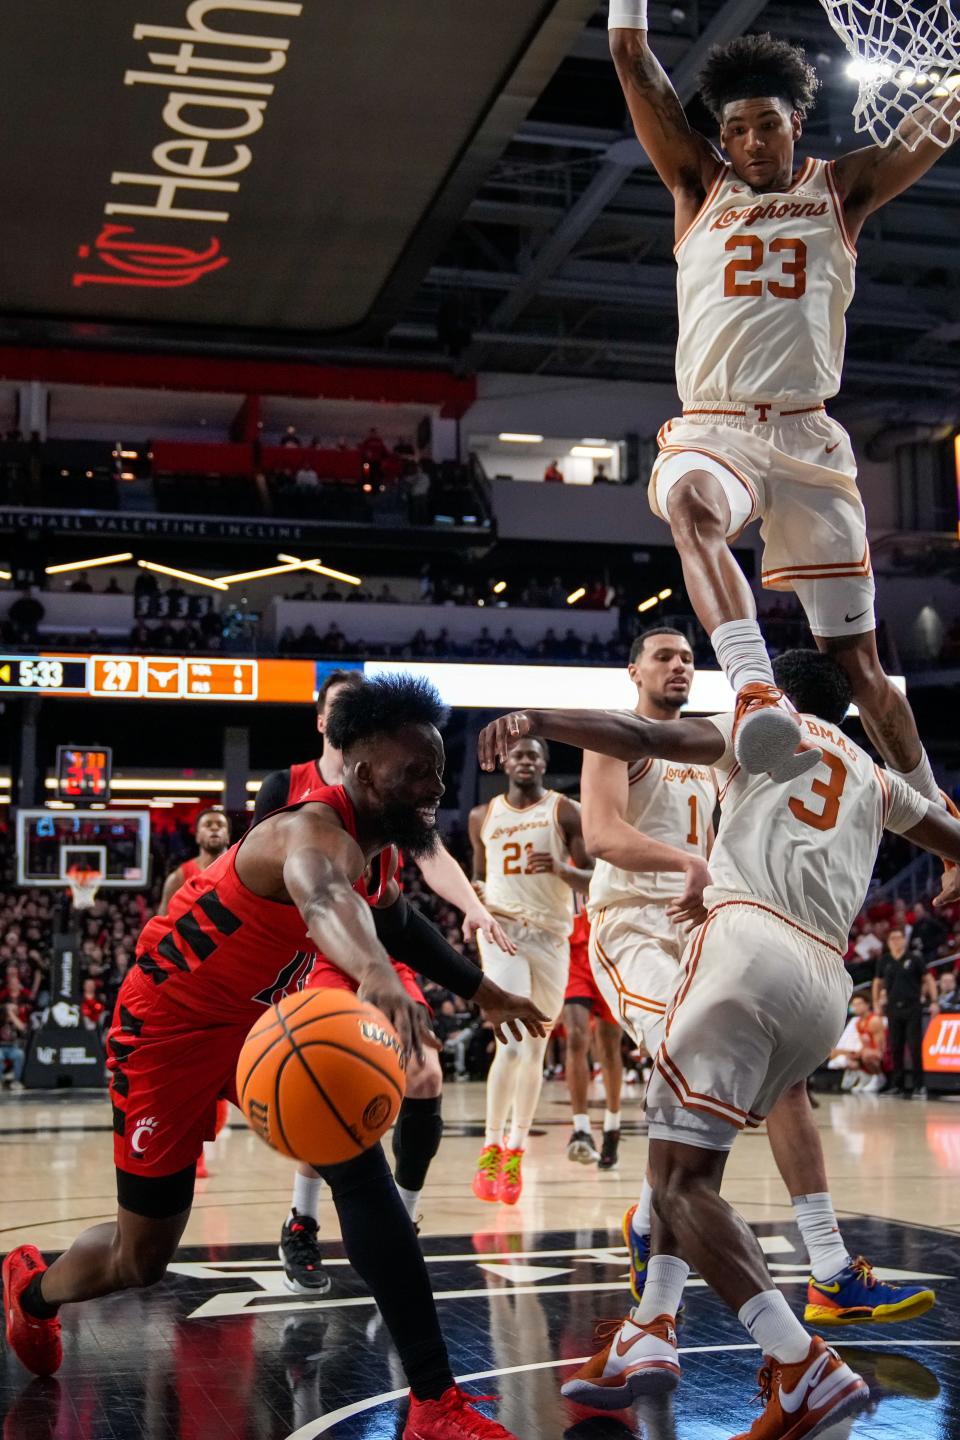 Texas Longhorns forward Dillon Mitchell (23) leaps over guard Max Abmas (3) as players collide over a loose ball Jan. 9 at Fifth Third Arena. Mitchell and the Longhorns beat the Bearcats 74-73.